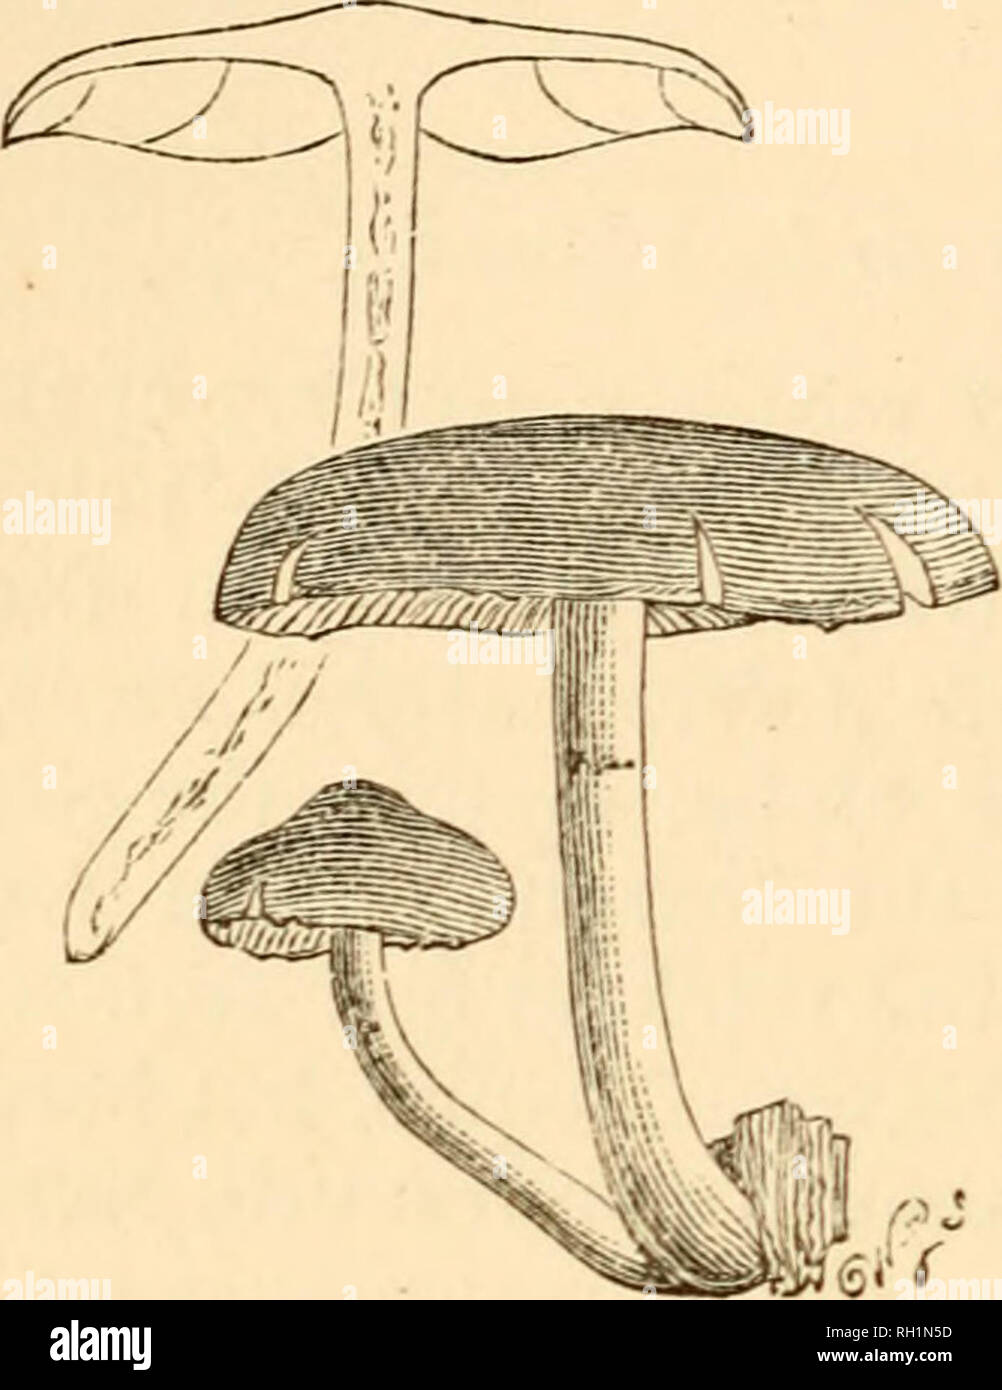 . British fungi (Hymenomycetes). Fungi -- Great Britain. 264 AGARICUS. Fiammuia. Subgeutis XXII. FLAMMULA {flam7na, a flame). Fr. Syst. Myc. 1. p. 250.. XXIV. Agariais {Flavumila) Jlavidus. One-half natural size. Veil fibrillose or none. Stem fieshy-Jibrous, not mealy upwards. Pileus fleshy, mar- gin at first z?ivohite. Gills deciirreiit or ad?iate without a si7t2(s, commonly quite entire, of one colour. A few grow on the ground, the greater num- ber on wood, passing into Pholiotae. Fr. Hyin. Eur. p. 244. {Fiammuia N^x^ restricted to spe- cies with truly decurrent gills it would correspond w Stock Photo